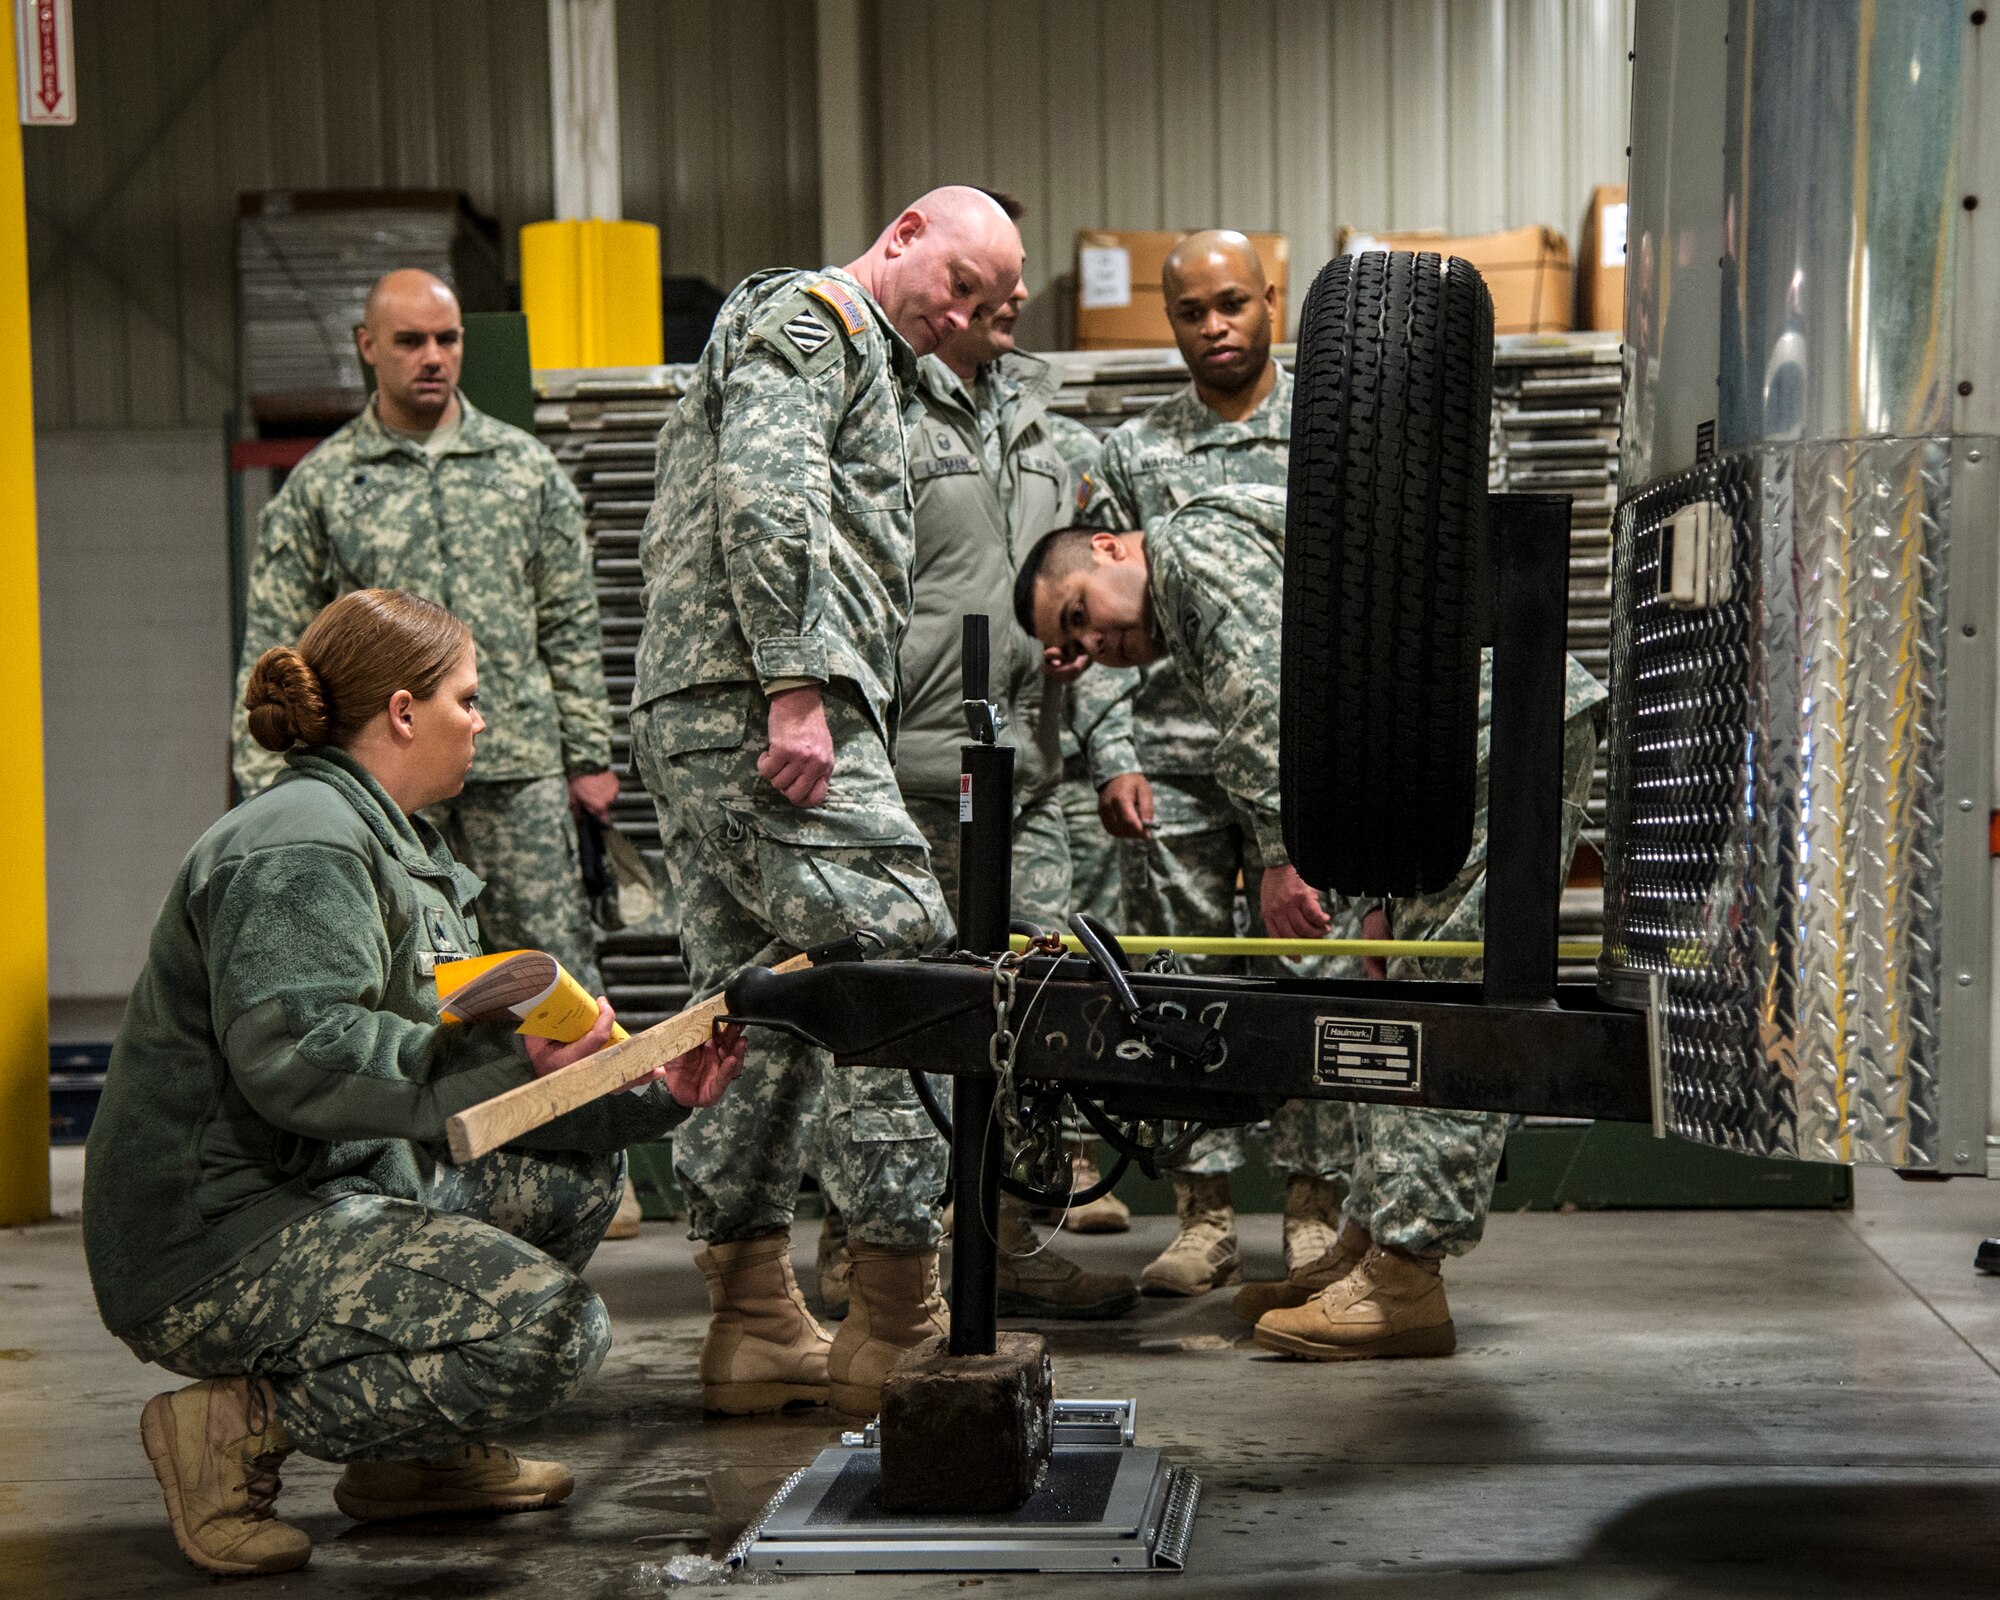 Army Sgt. Amber Johnson, Federal Emergency Management Agency, documents the length of a trailer during a joint exercise at Joint Base McGuire-Dix-Lakehurst, N.J., Feb. 12, 2015. Mobility specialists comprised of Army, Air Force and FEMA personnel came together to review policies and practices in the event airlift is needed to support a national emergency or crisis. (U.S. Air Force photo by Staff Sgt. Scott Saldukas/Released)